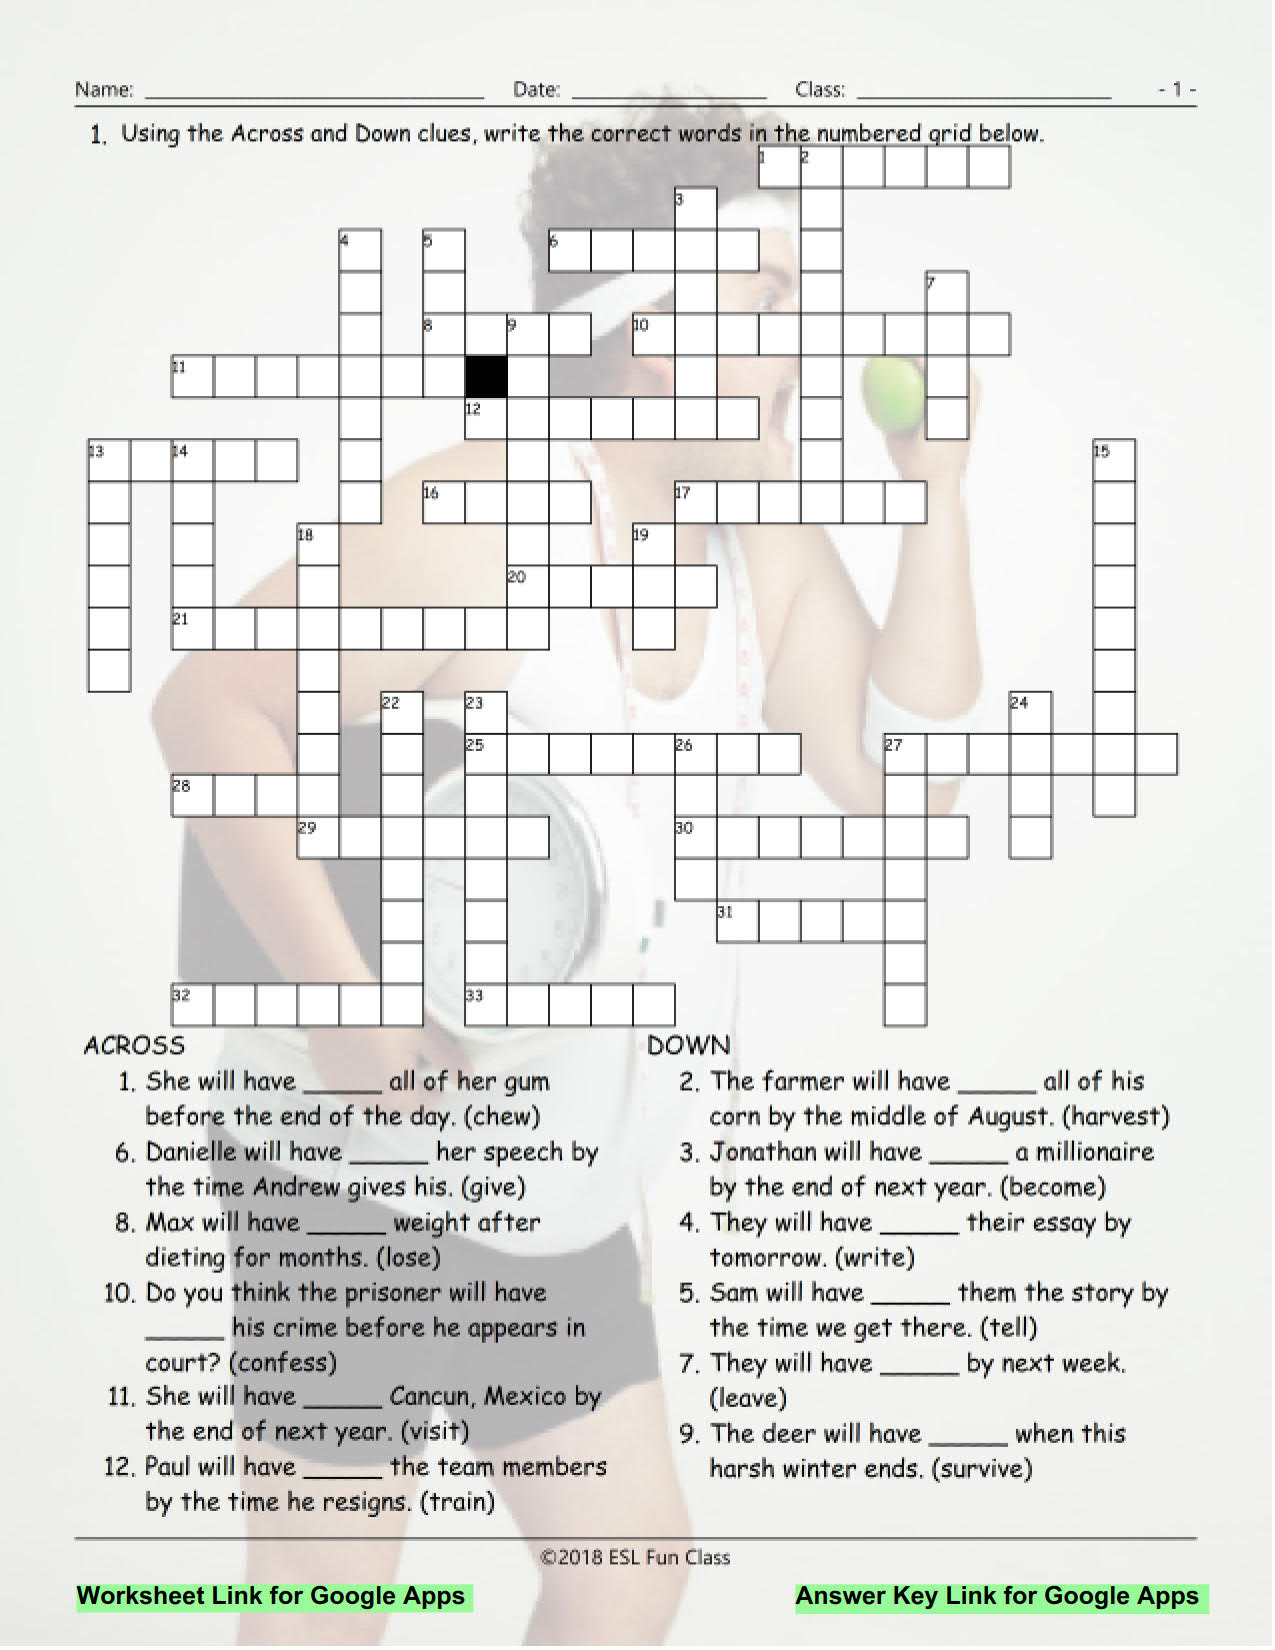 Future Perfect Tense Interactive Crossword Puzzle For Google Apps 